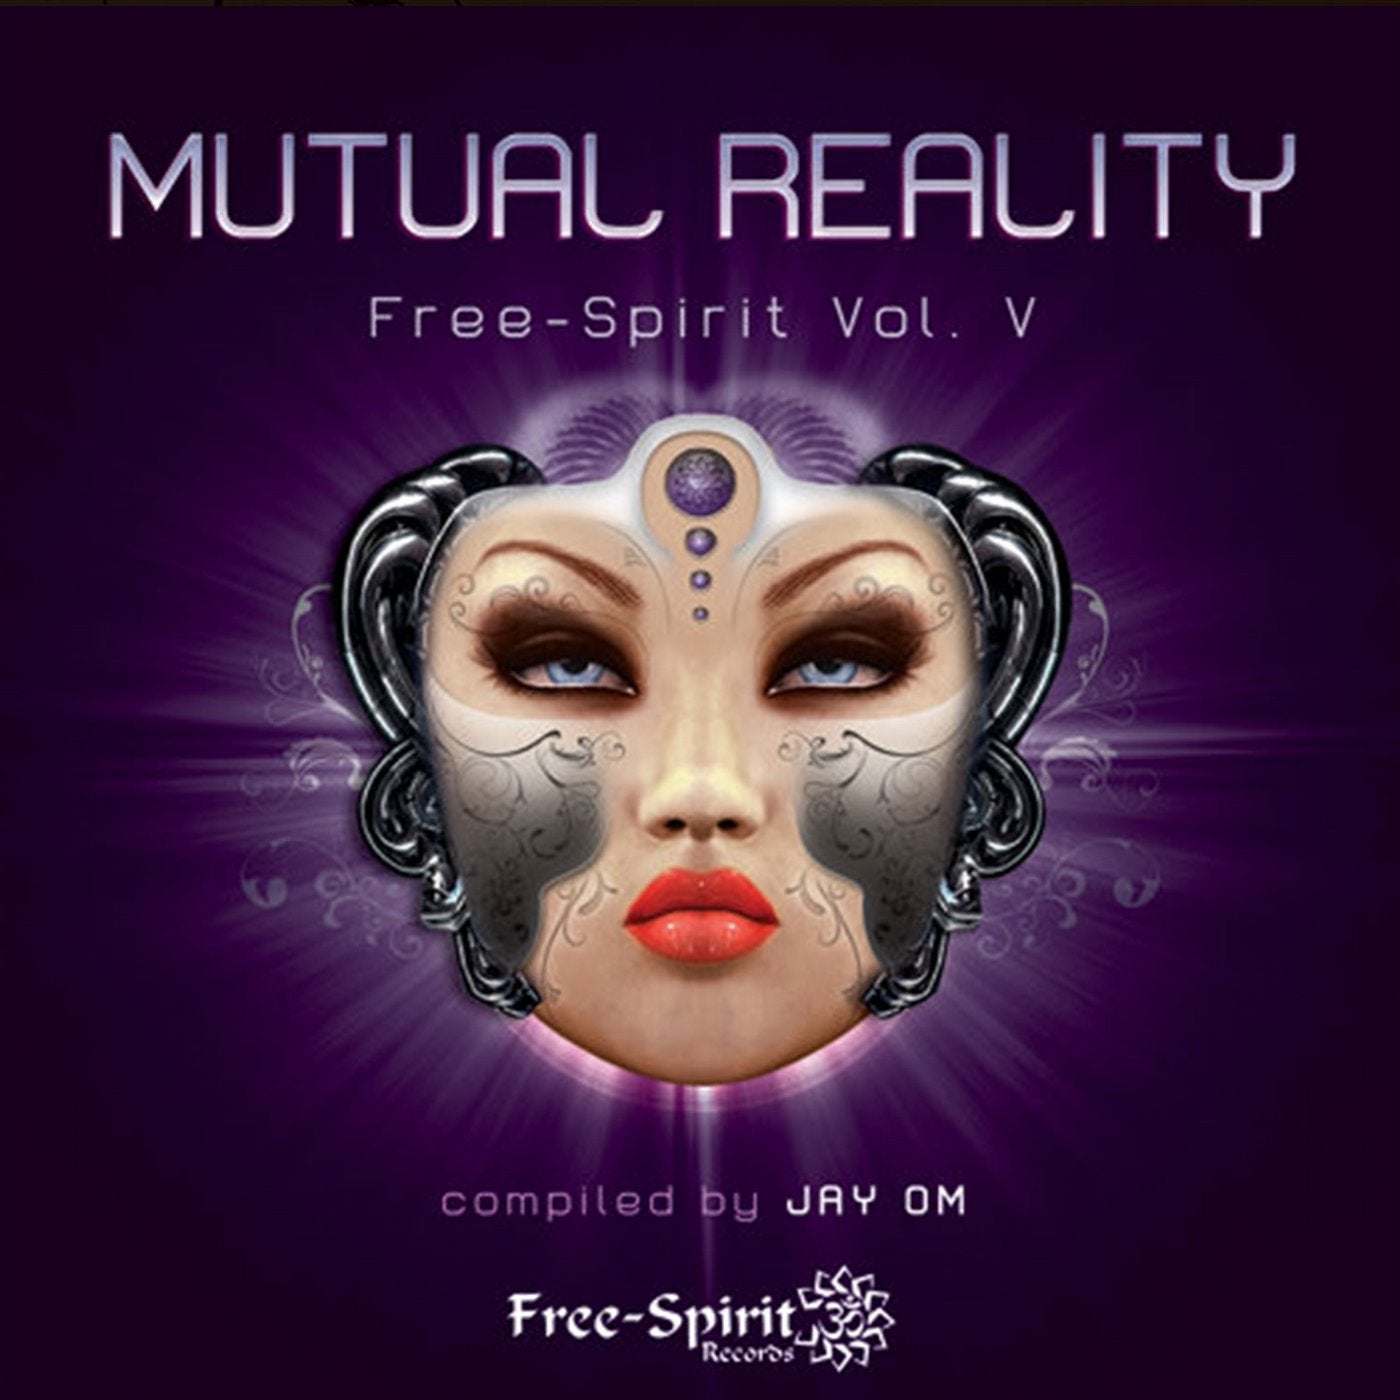 Free-Spirit, Vol. V - Mutual Reality Compiled by Jay Om